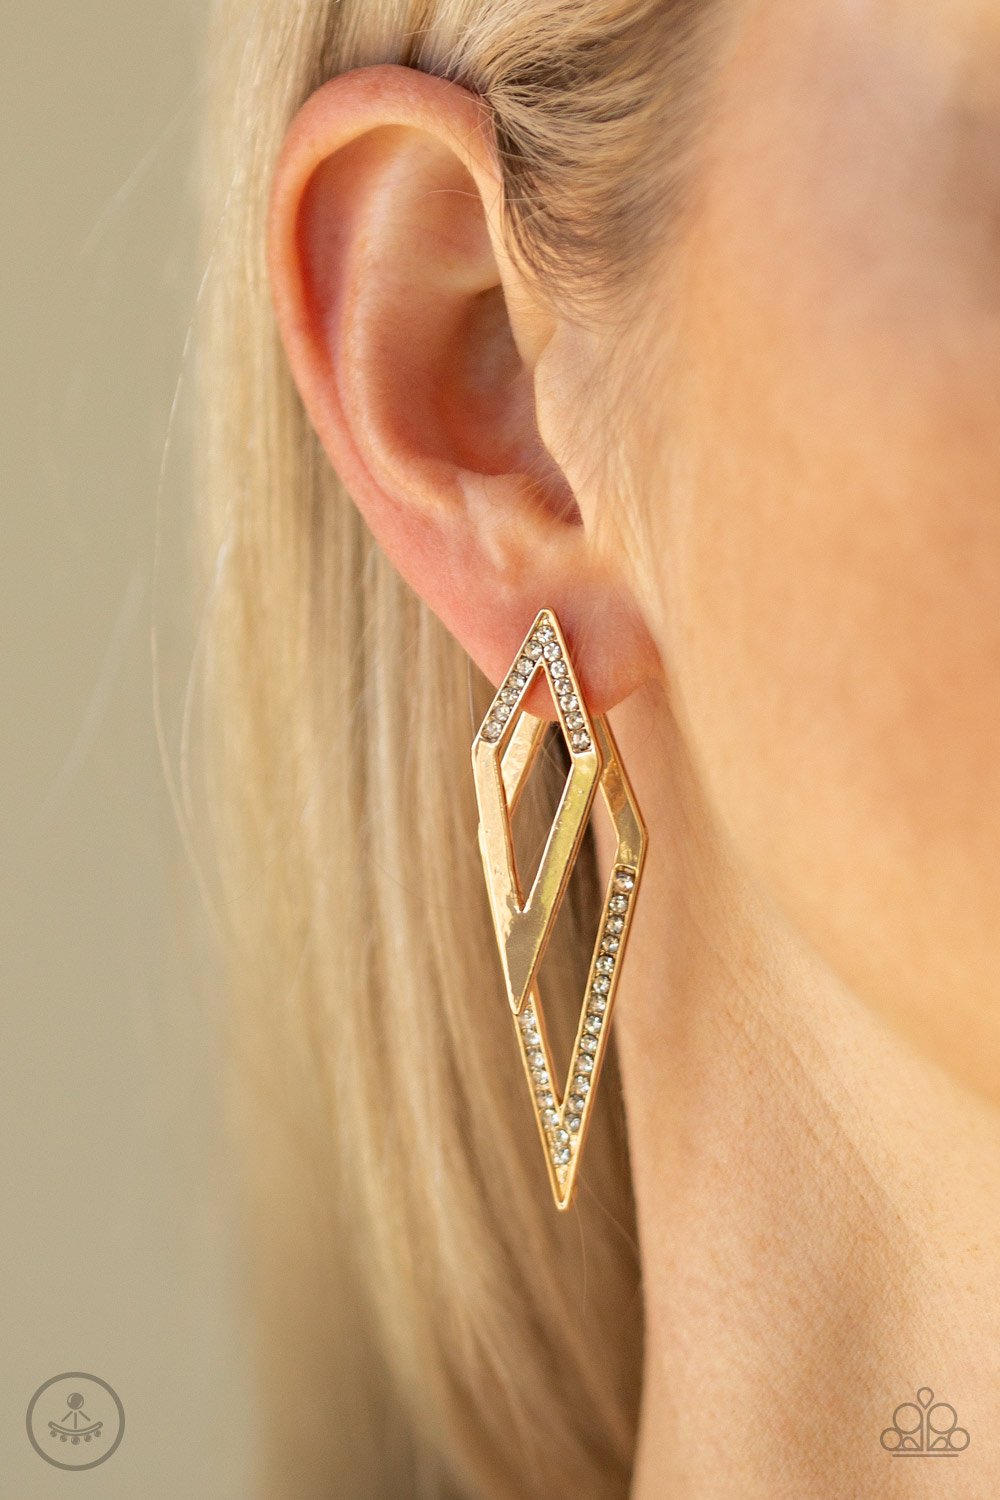 Point-BANK-gold-Paparazzi earrings